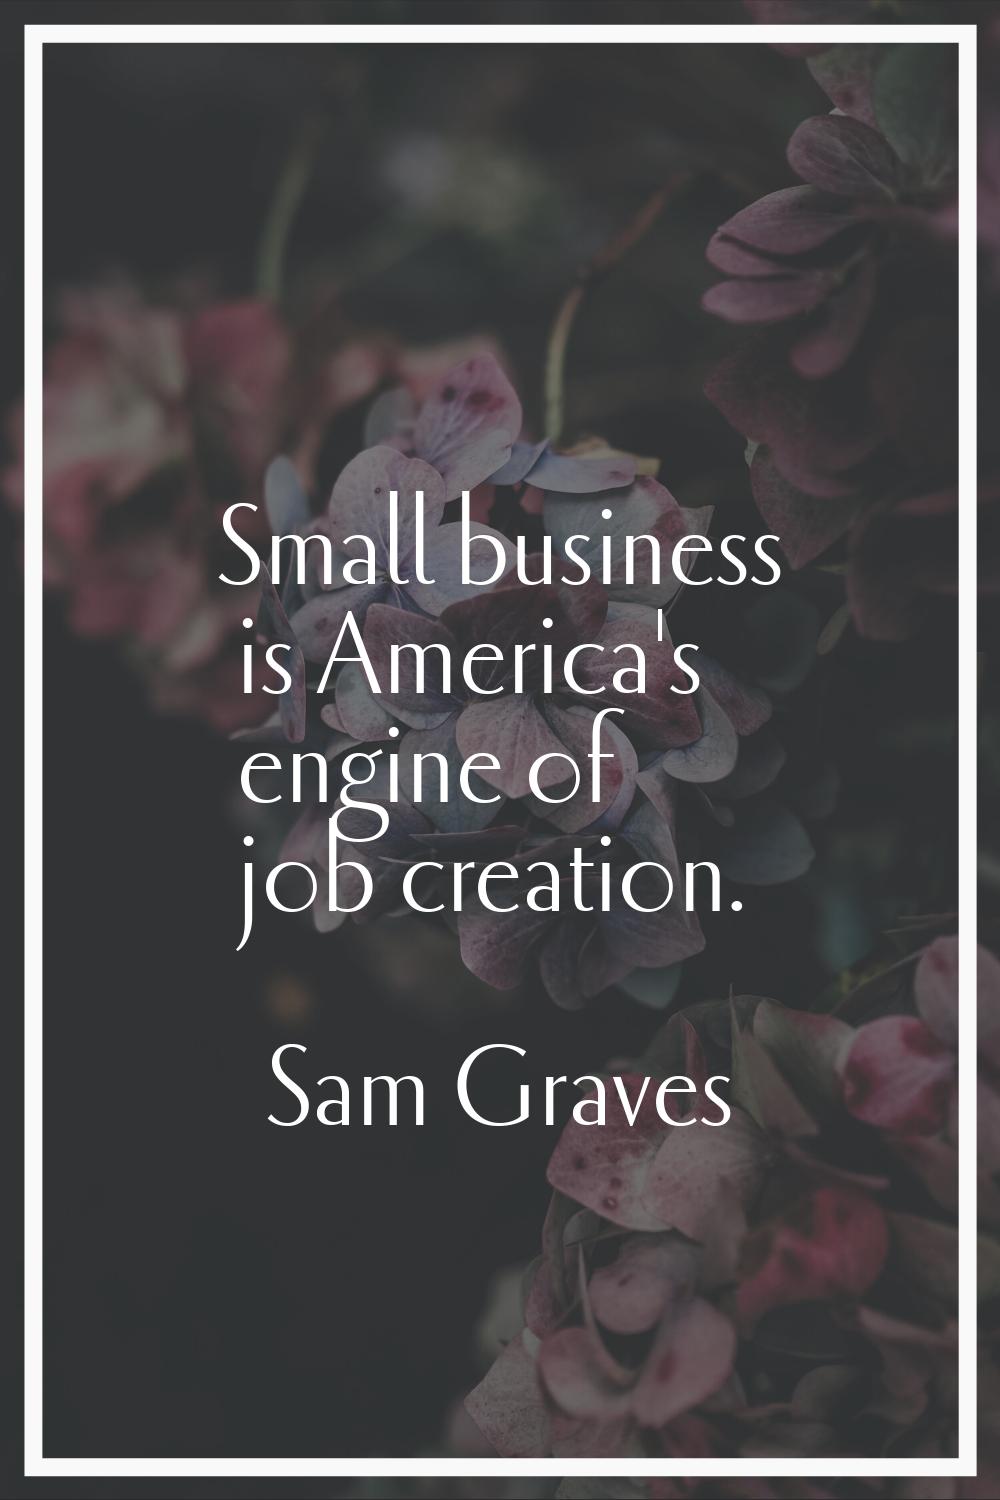 Small business is America's engine of job creation.